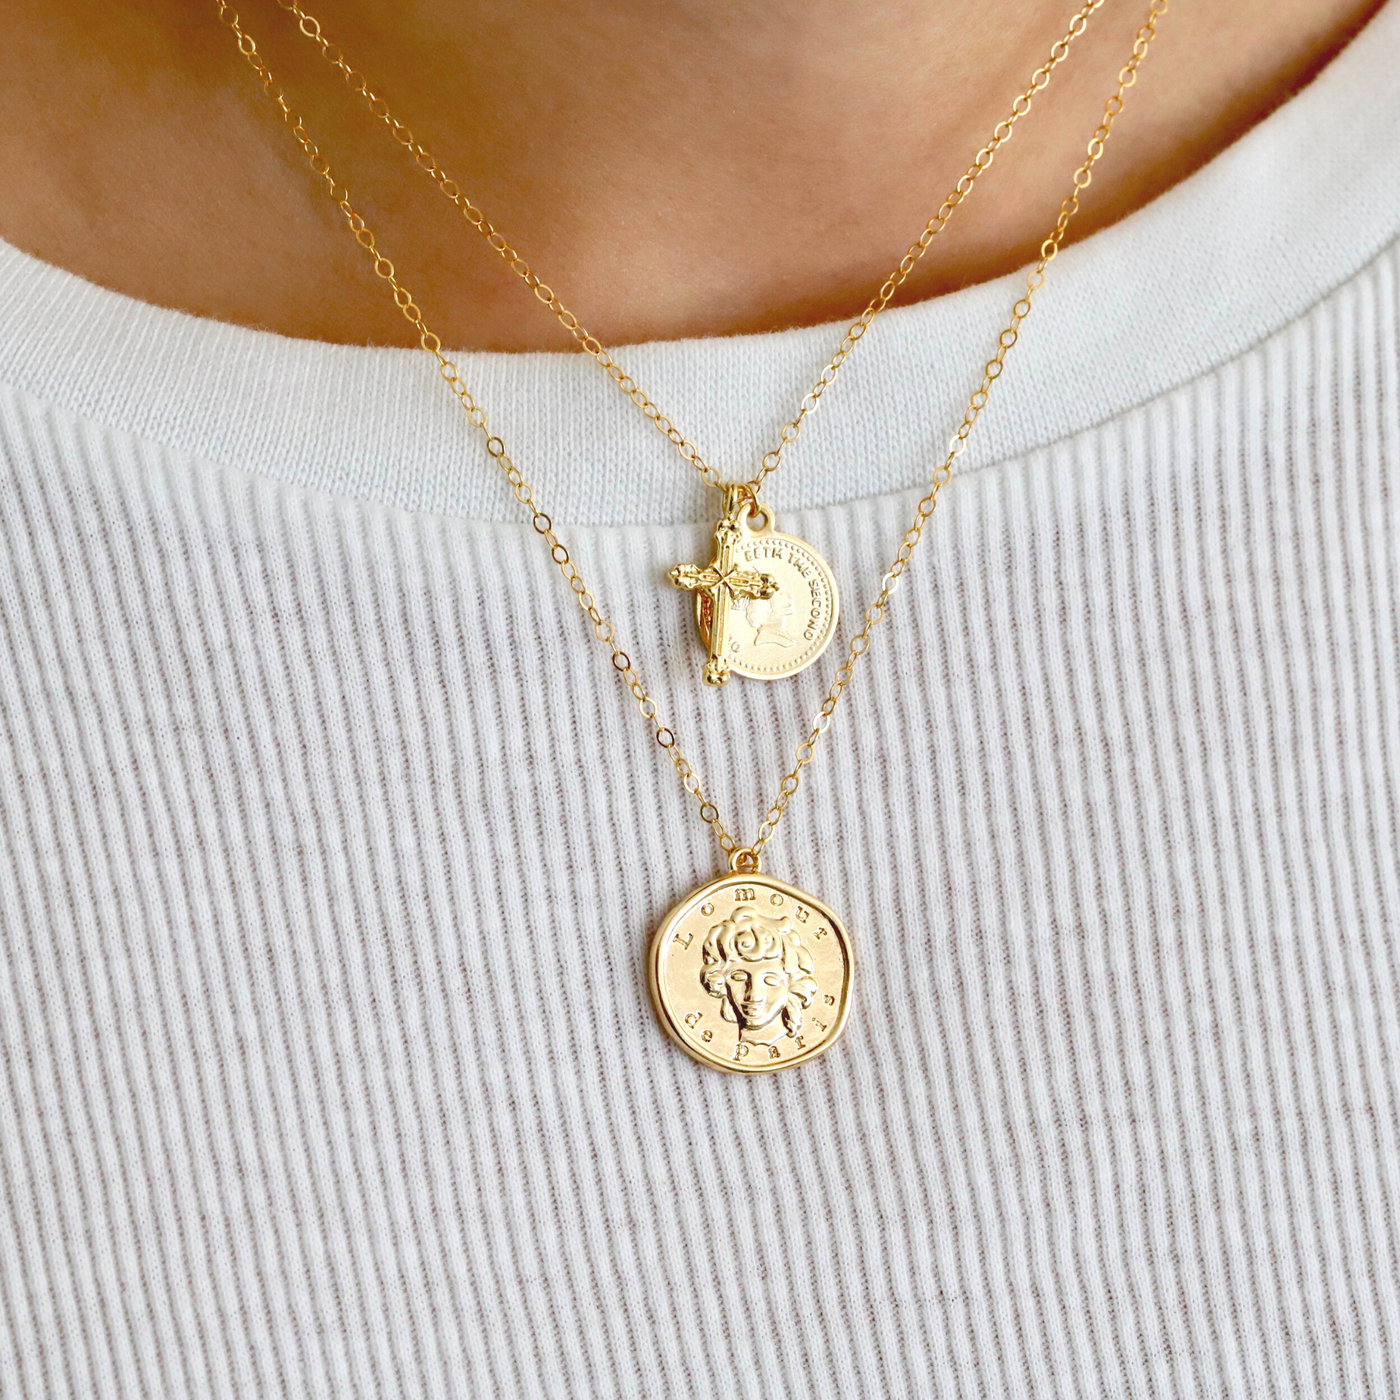 Dainty gold cross and coin necklace for everyday ware